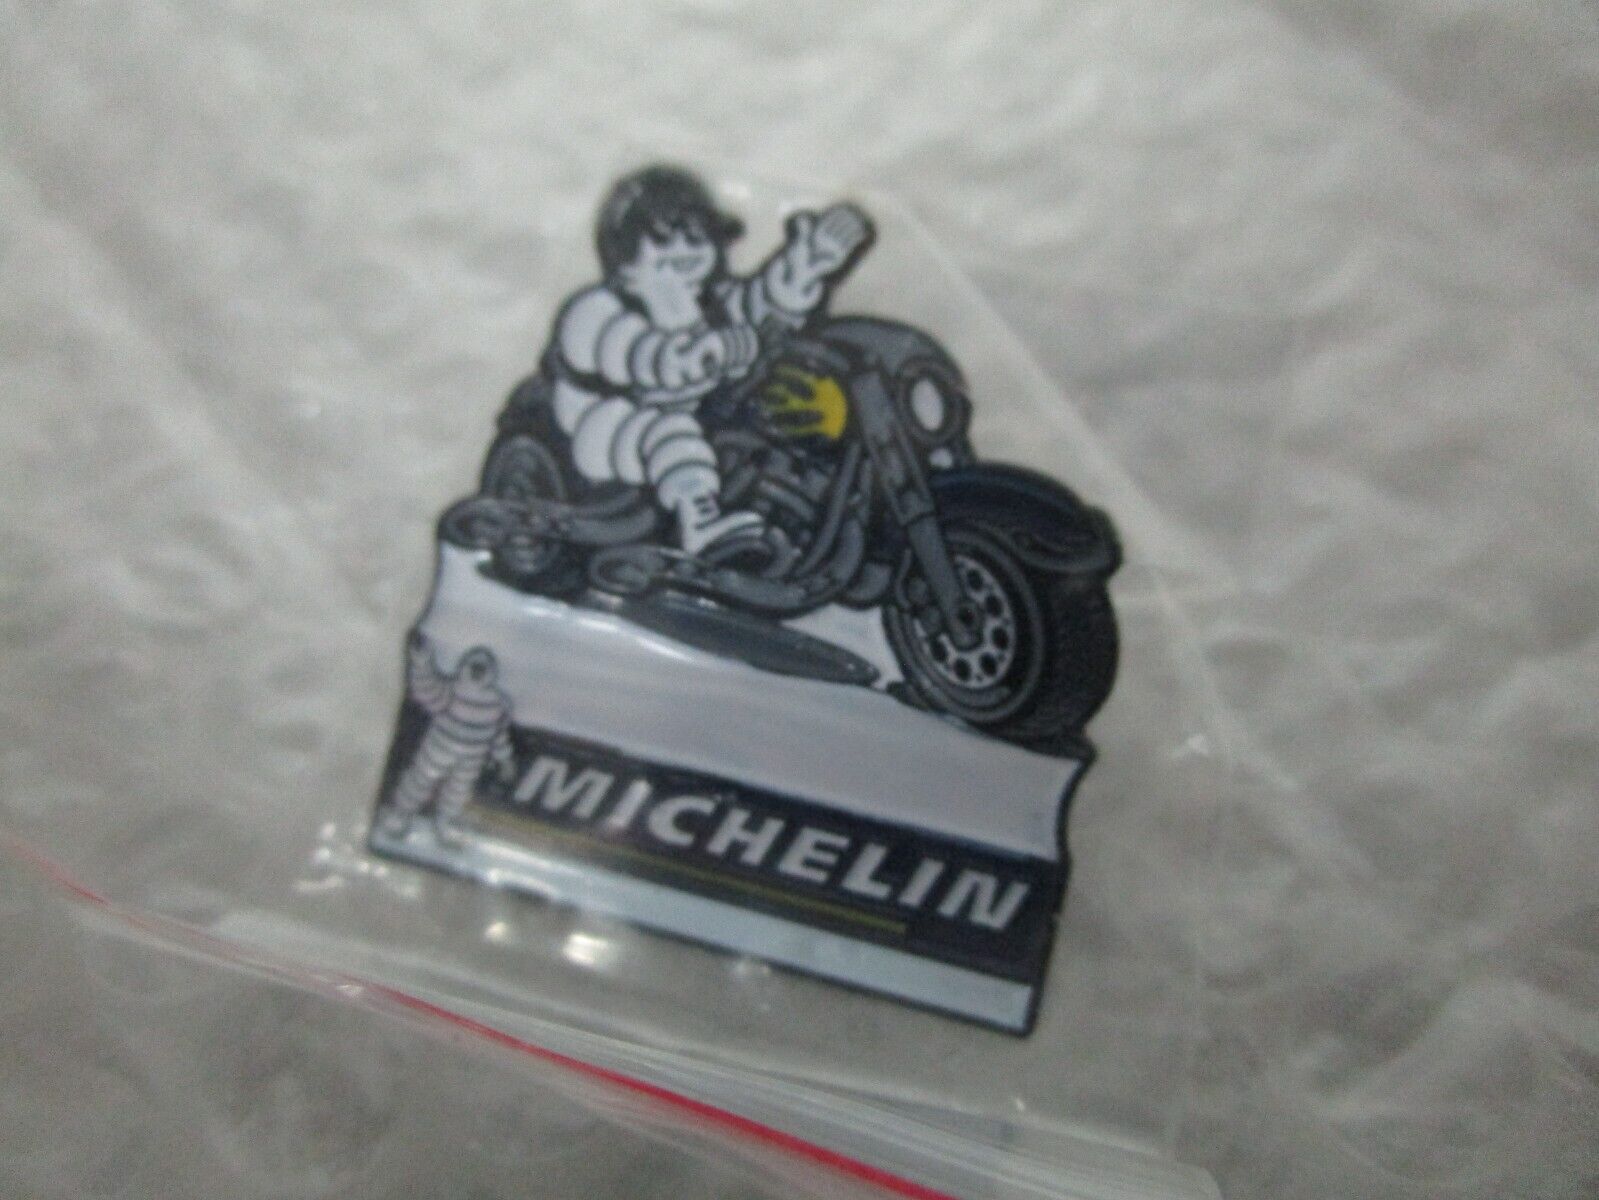 Michelin Tires Motorcycle Vest Hat Pin